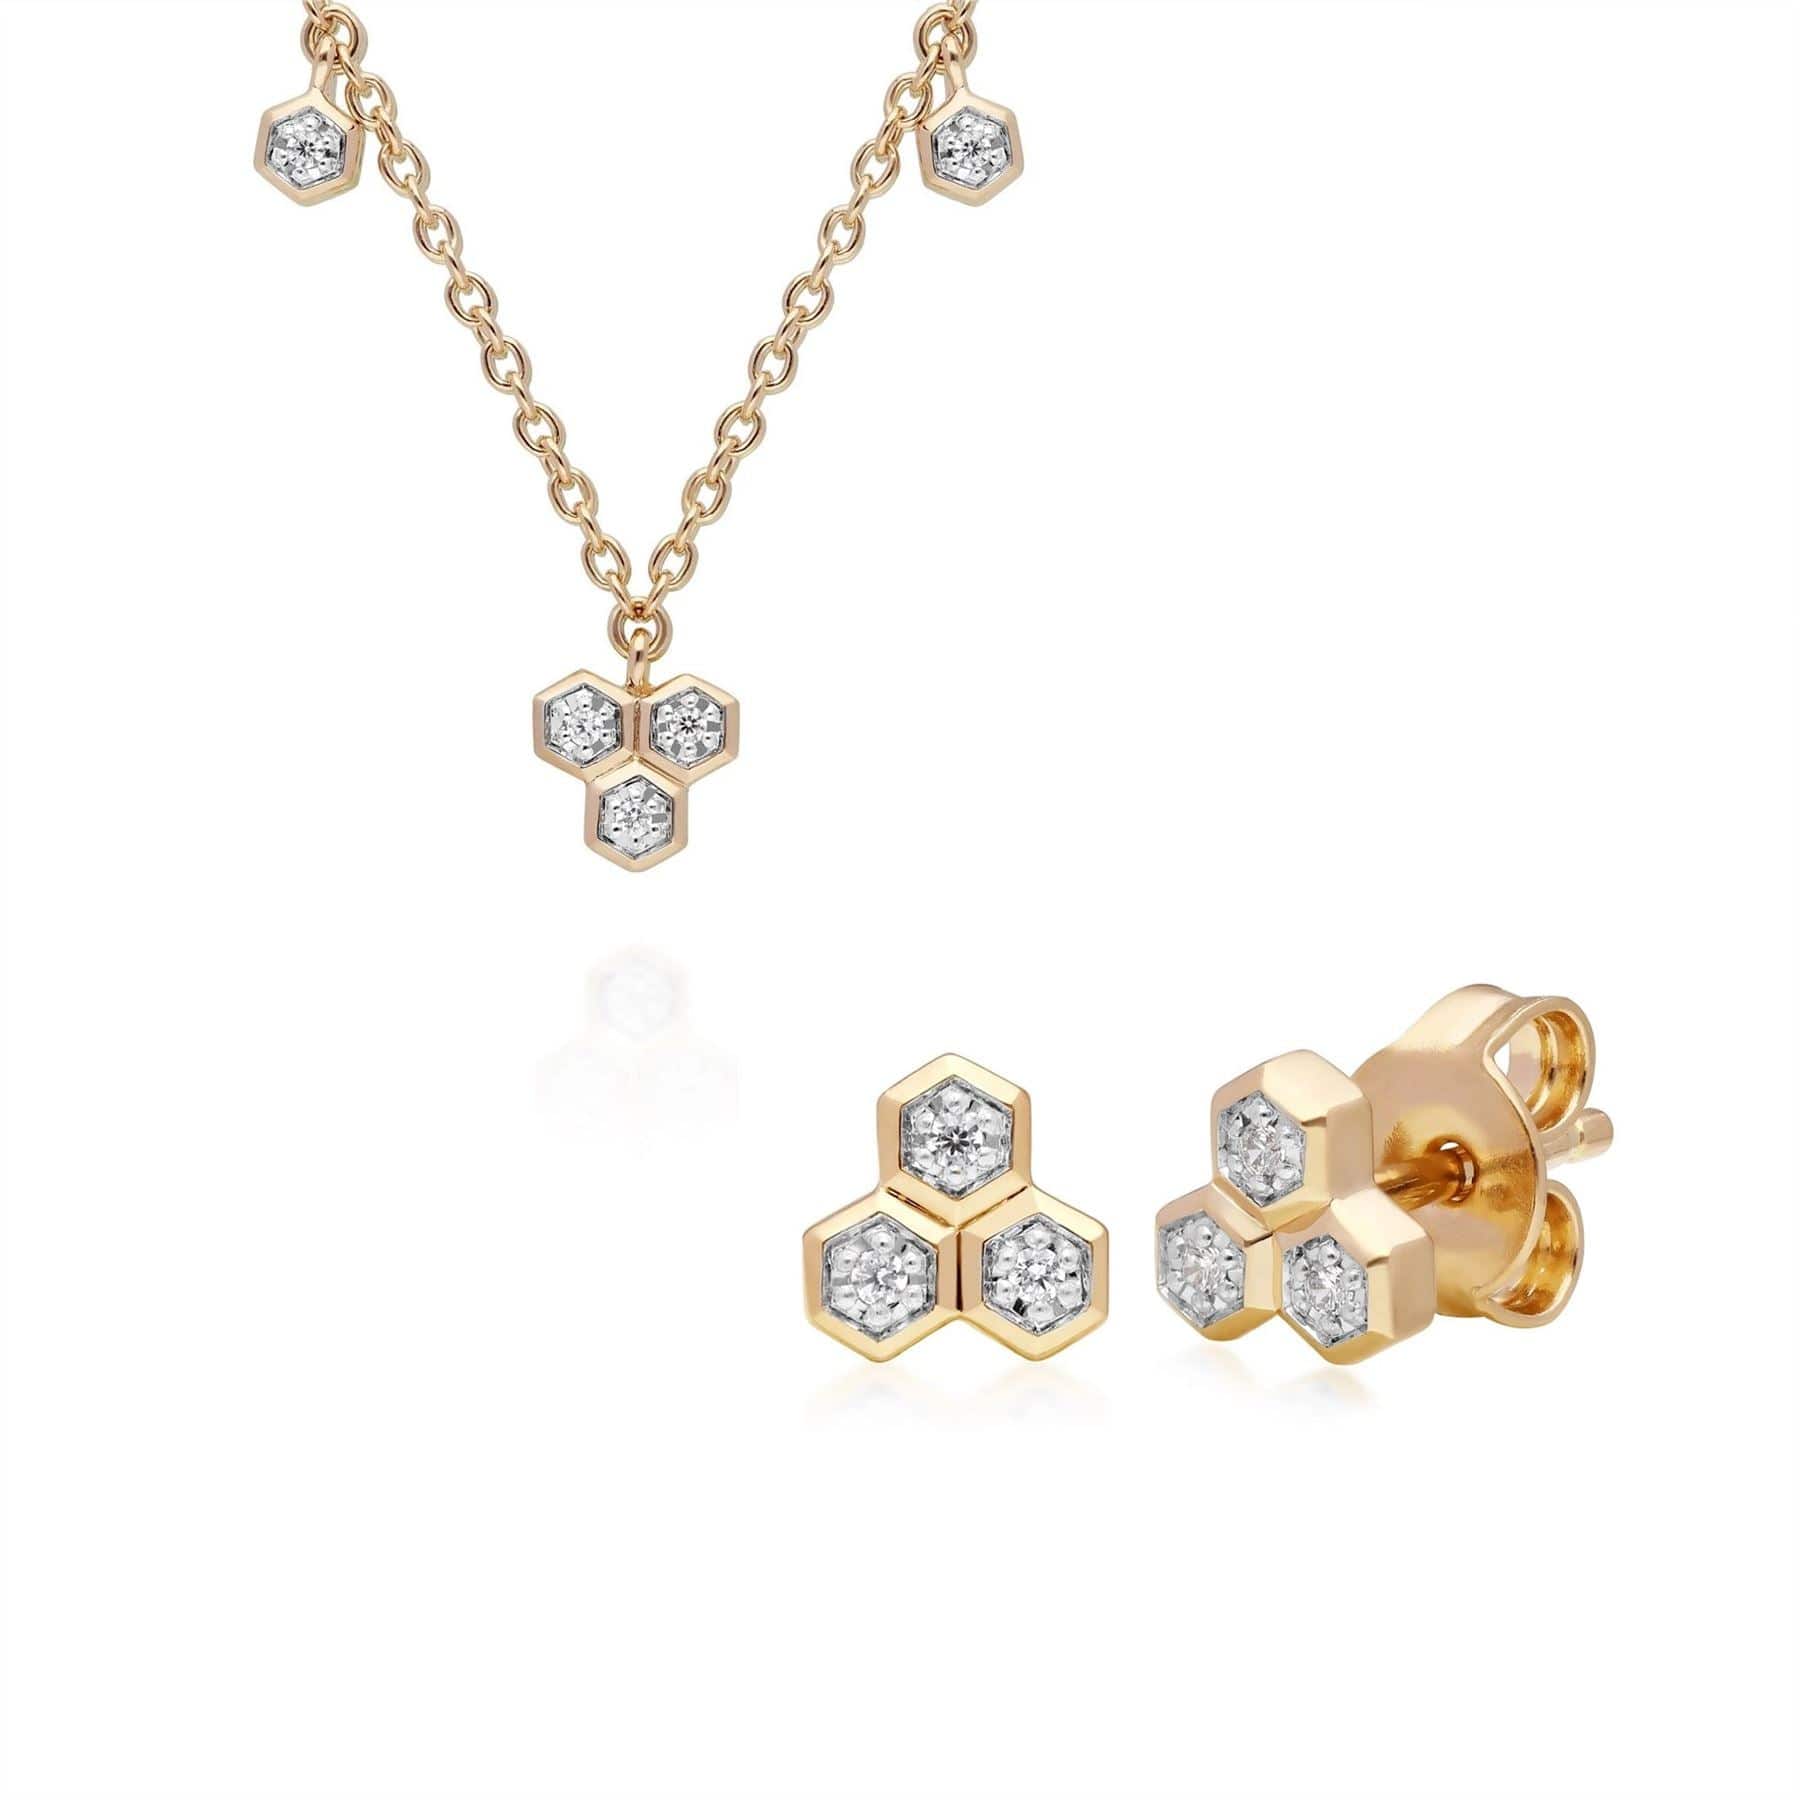 191N0229019-191E0398019 Diamond Trilogy Necklace & Stud Earring Set in 9ct Yellow Gold 1